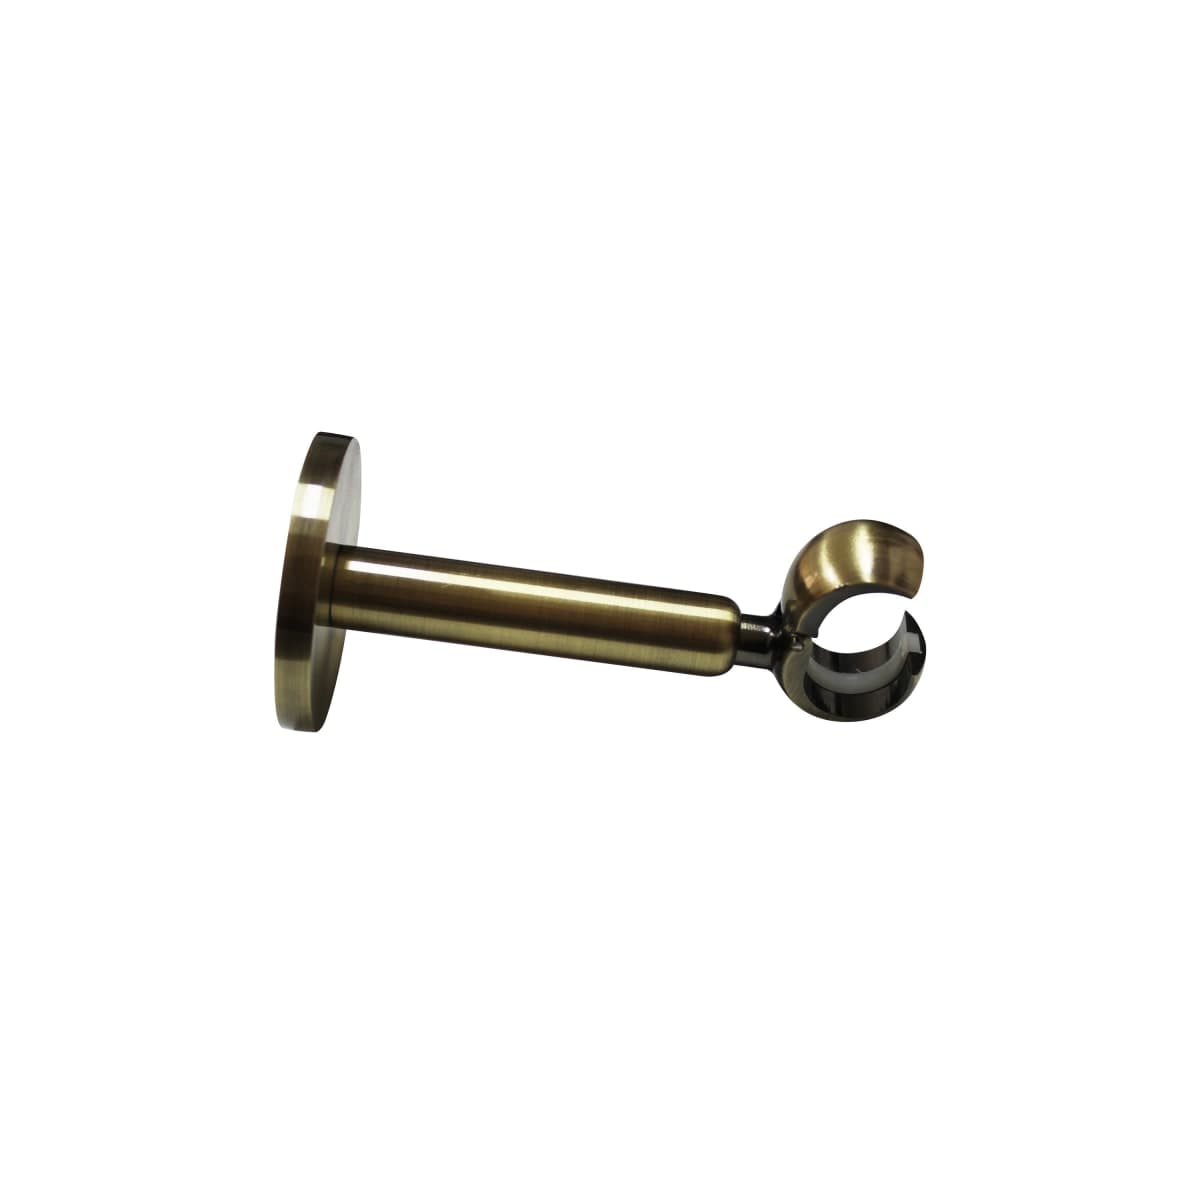 METAL CLOSED SUPPORTS ANTIQUE GOLD 115-160 MM D20 - best price from Maltashopper.com BR480009335